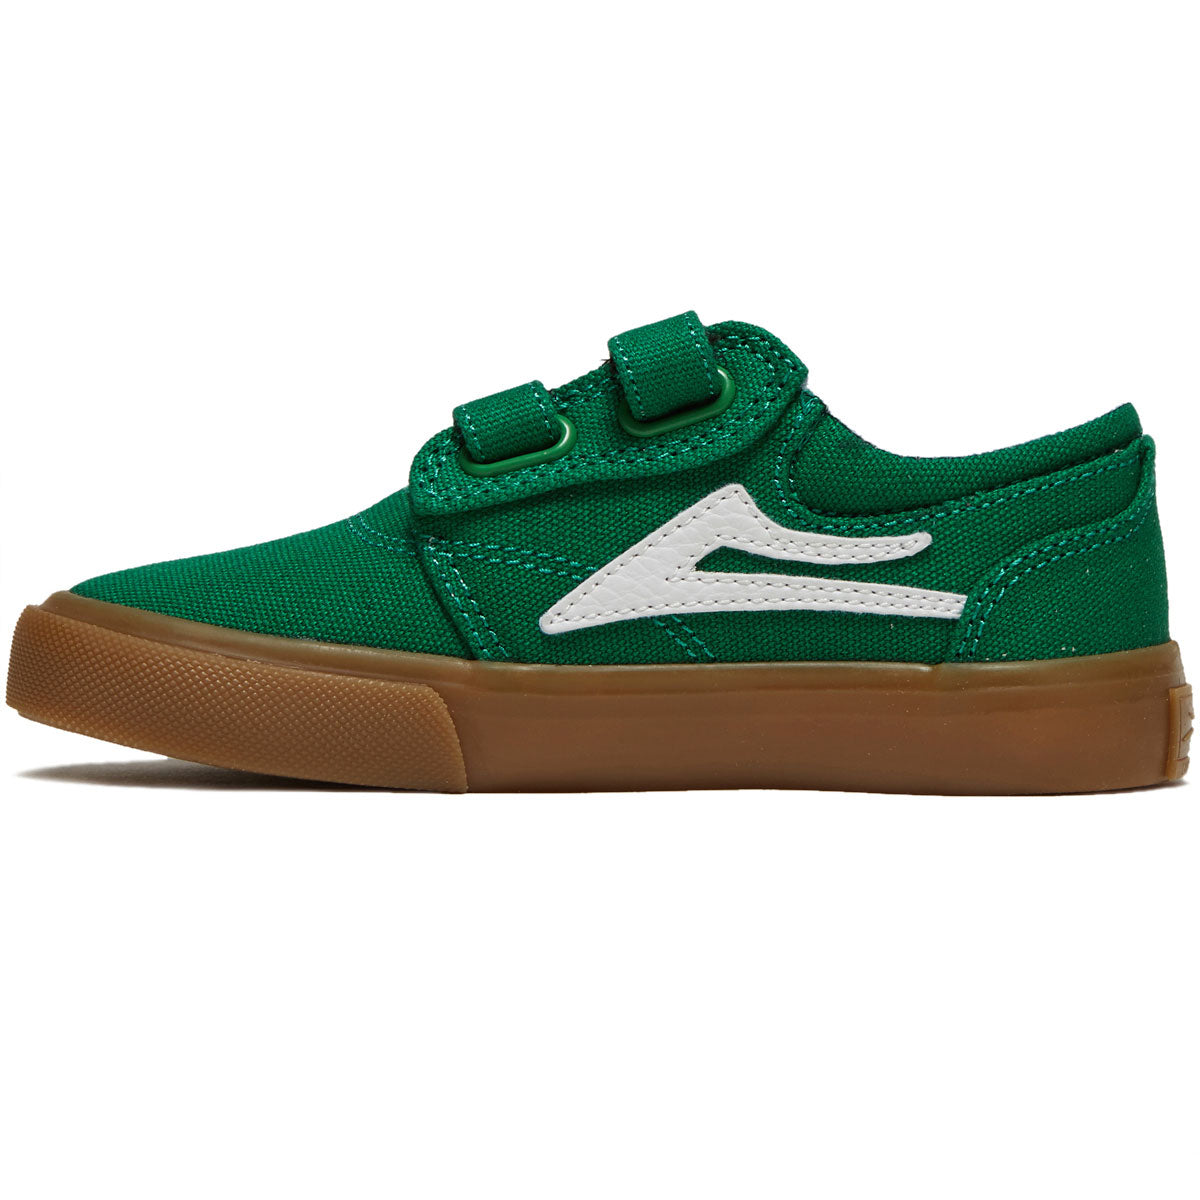 Lakai Youth Griffin Shoes - Green/Gum Canvas image 2